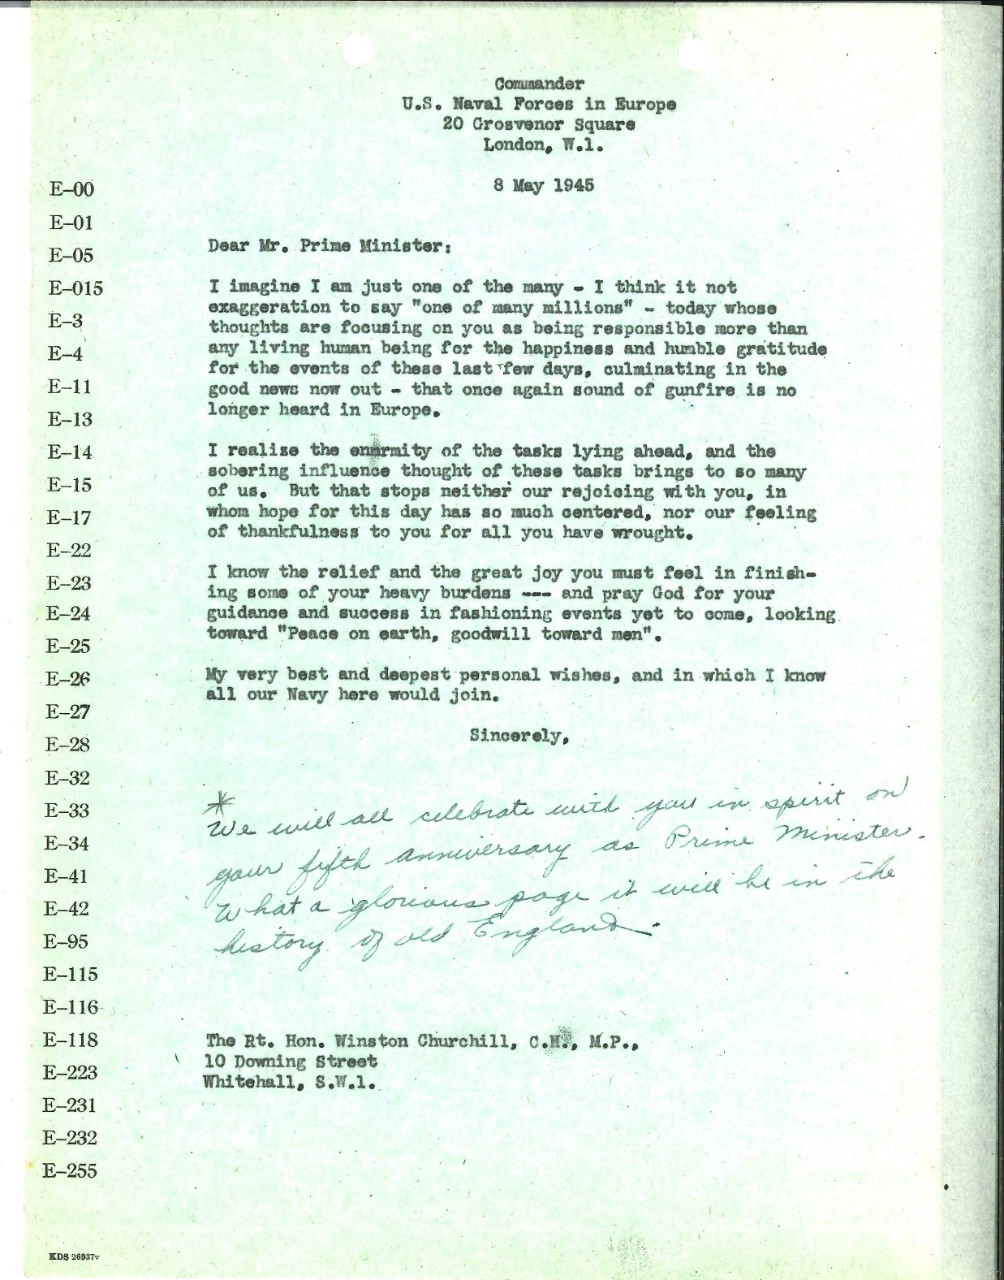 Letter from Admiral Harold Stark to Winston Churchill, May 8, 1945